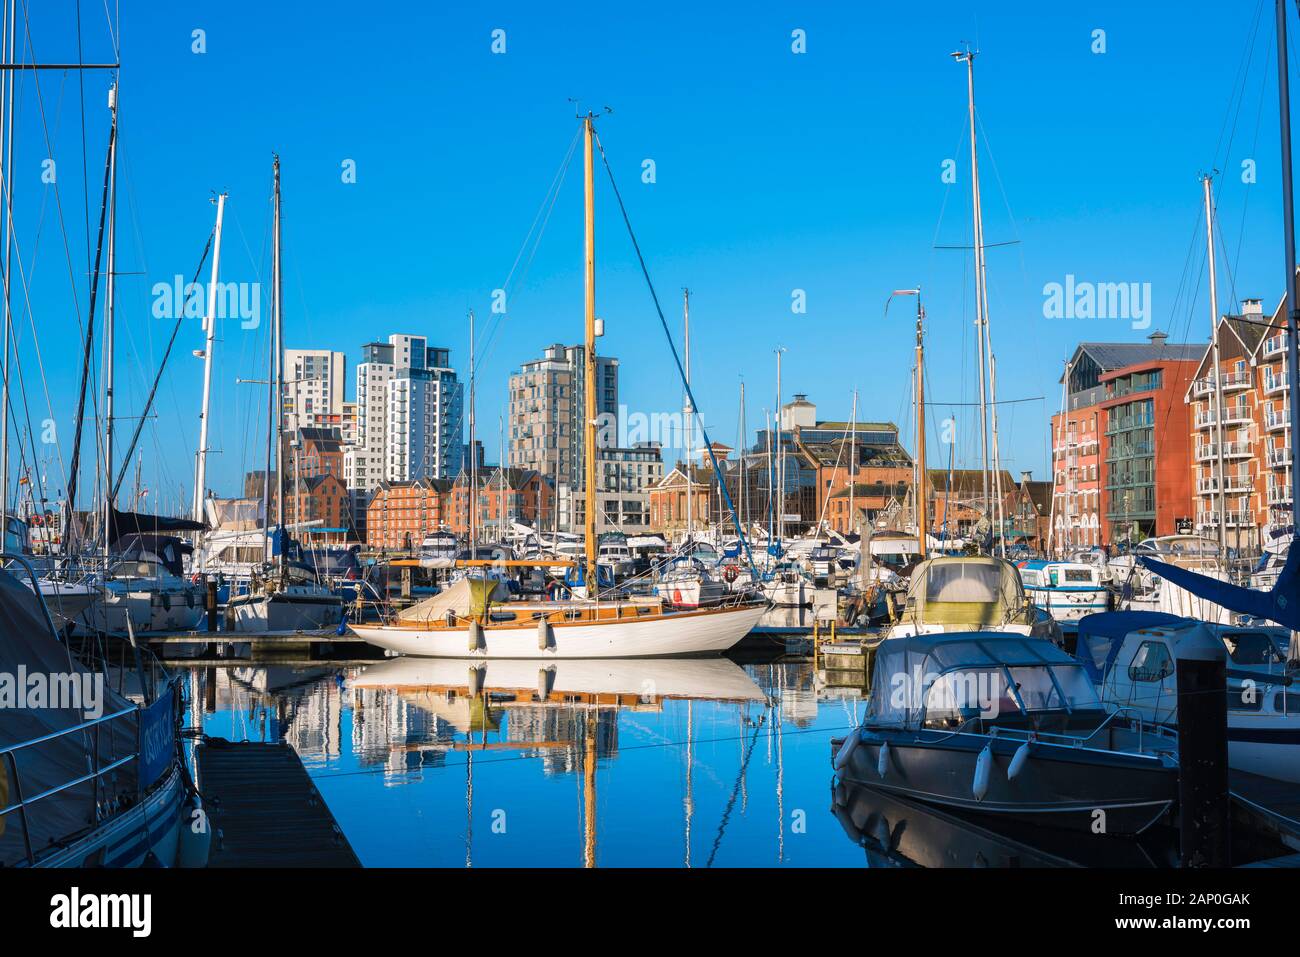 Ipswich Marina, view of yachts and leisure craft moored in Ipswich marina with residential property in the background, Suffolk, East Anglia, UK. Stock Photo